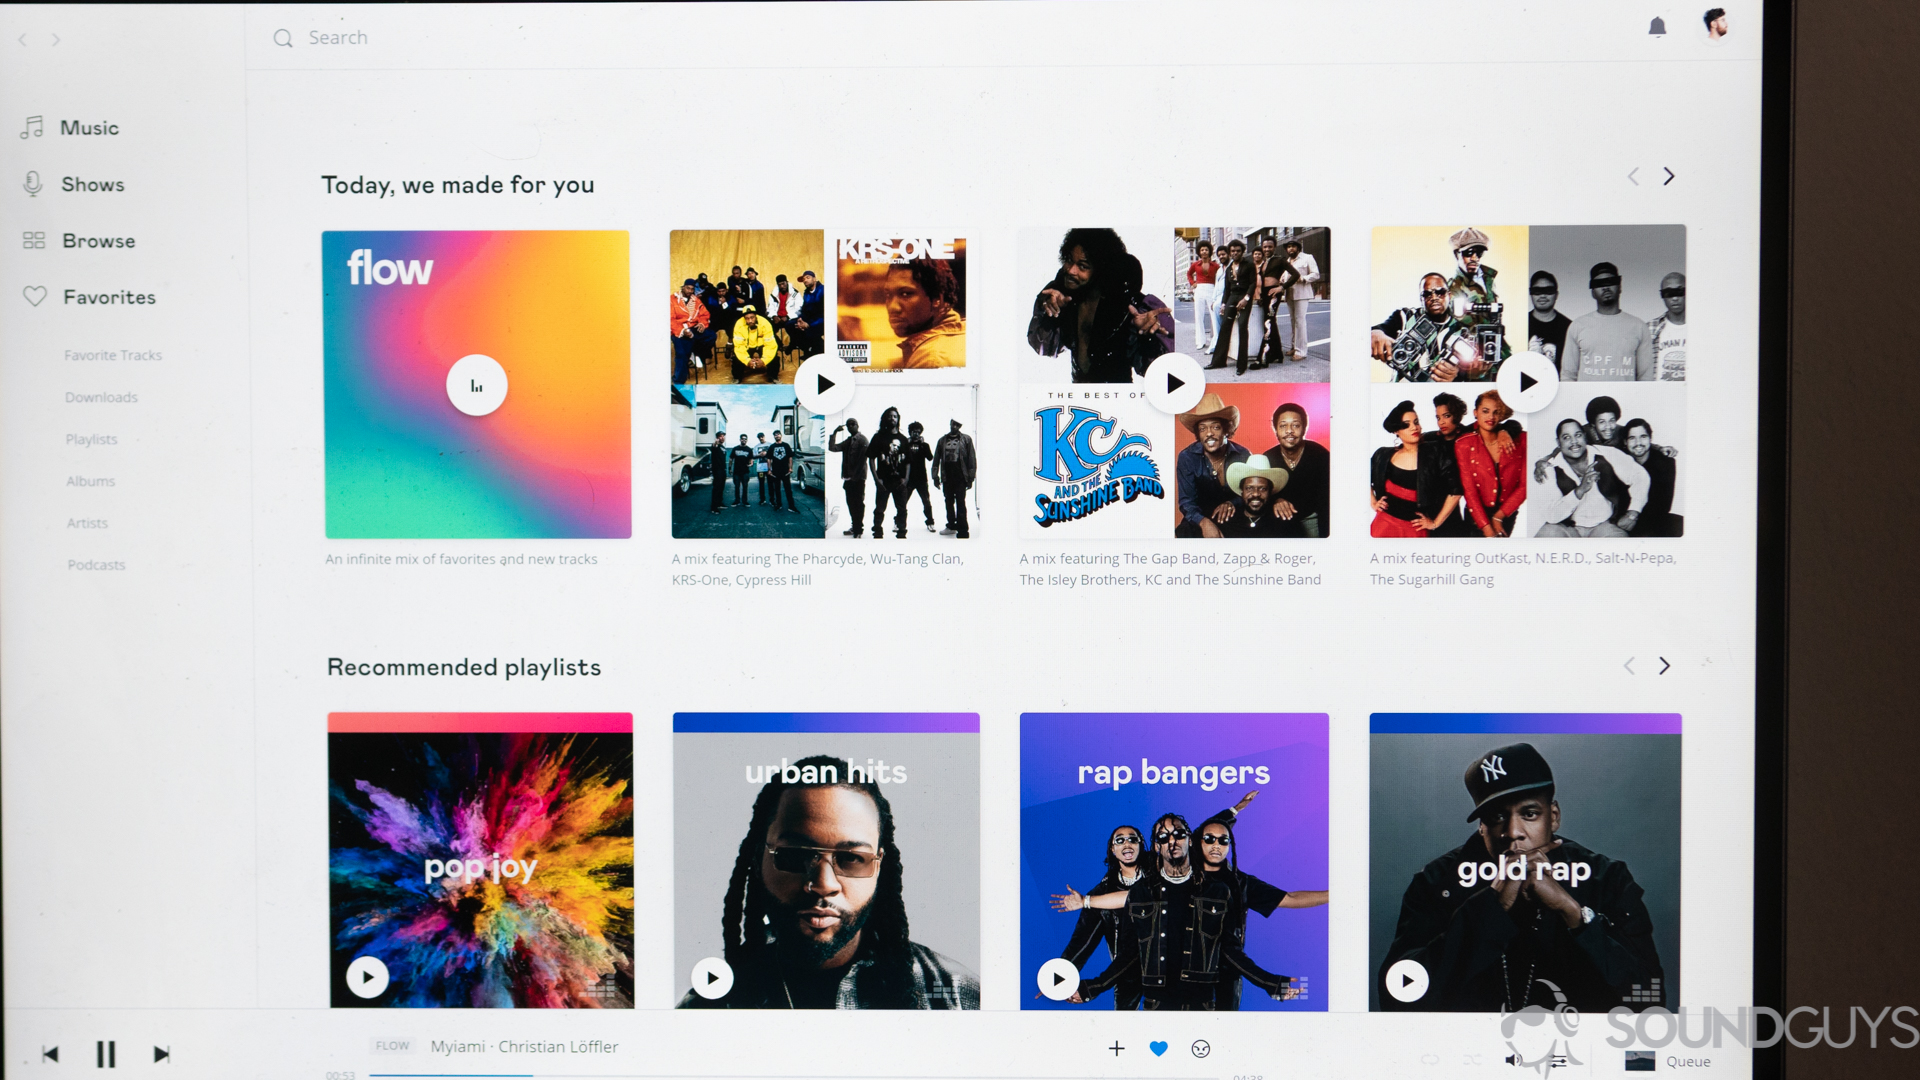 Pictured is the main music section of the Deezer app on desktop